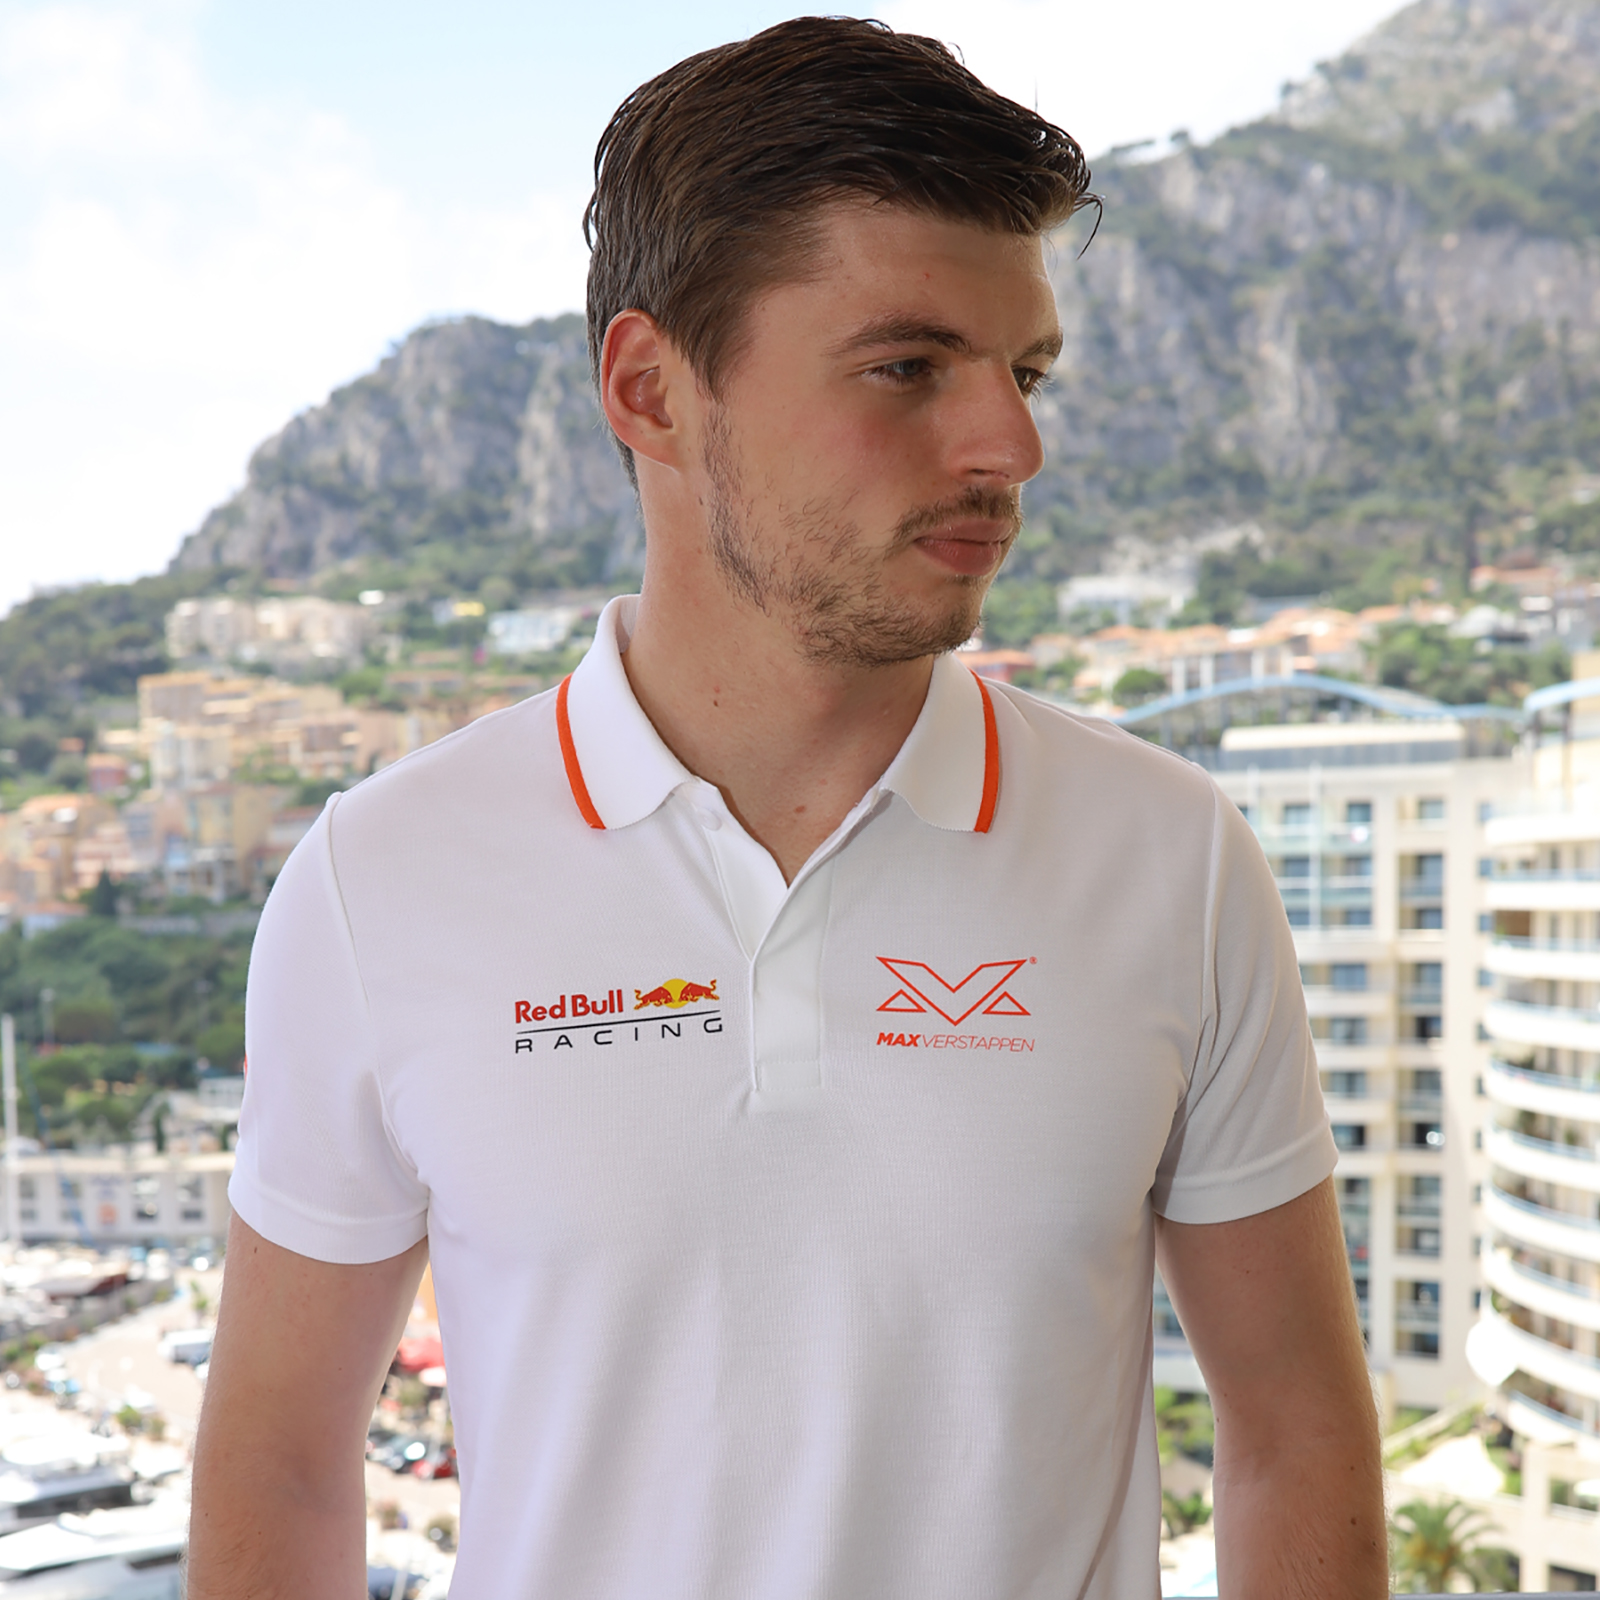 Max Verstappen & Red Bull Racing Polo shirts